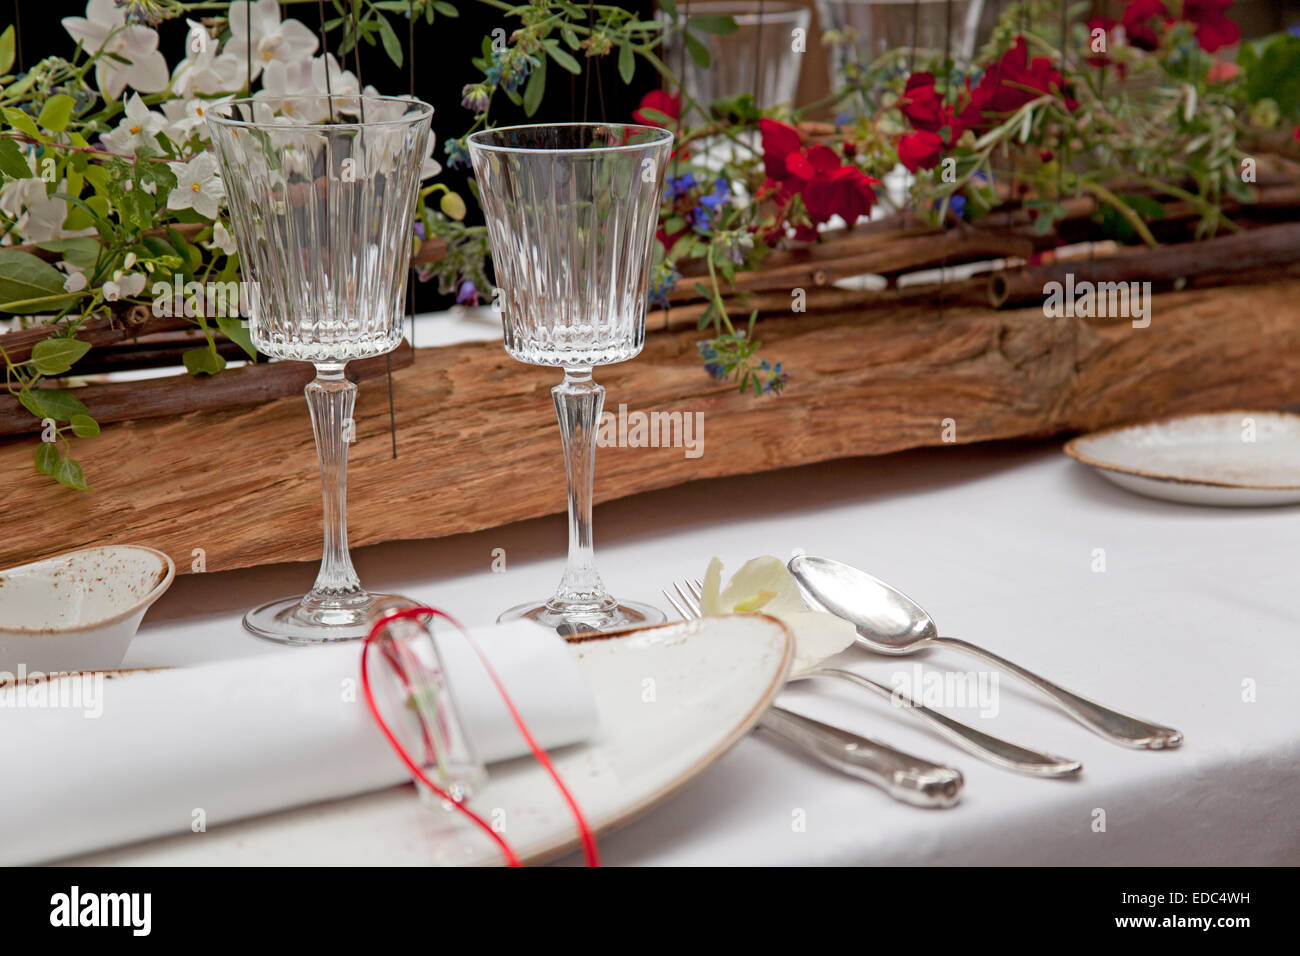 set-up table Foto Stock